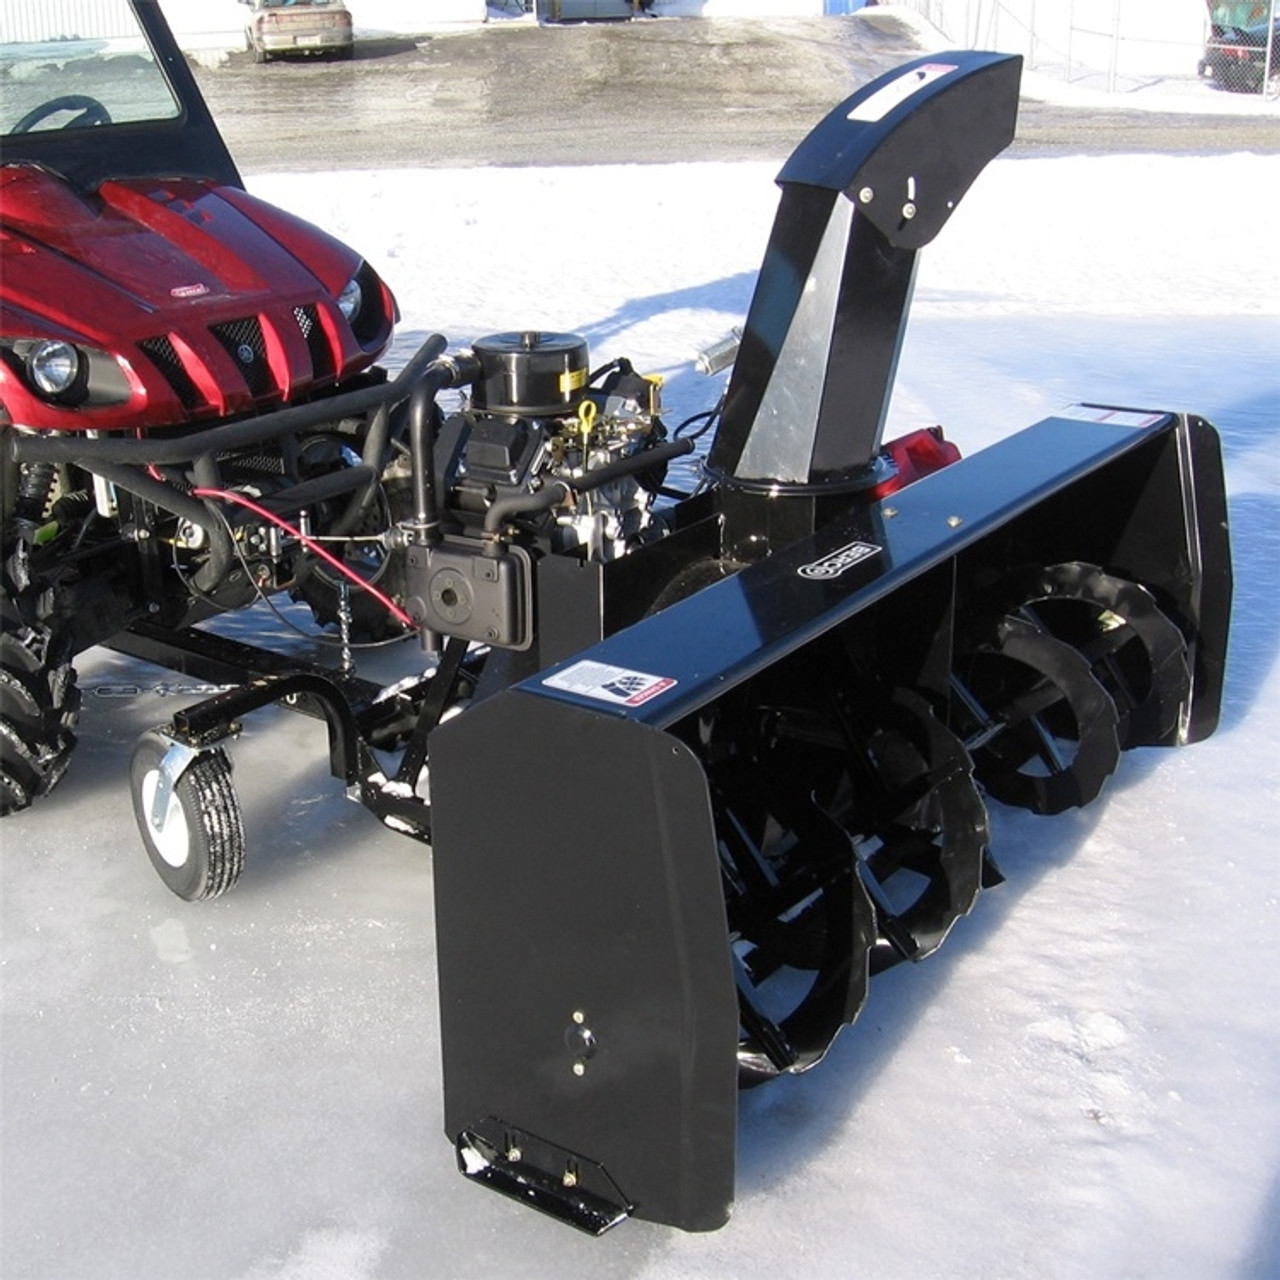 A front-oblique view of a Honda Pioneer Versatile Snowblower by Bercomac, installed on a side-by-side and in use over snowy terrain.